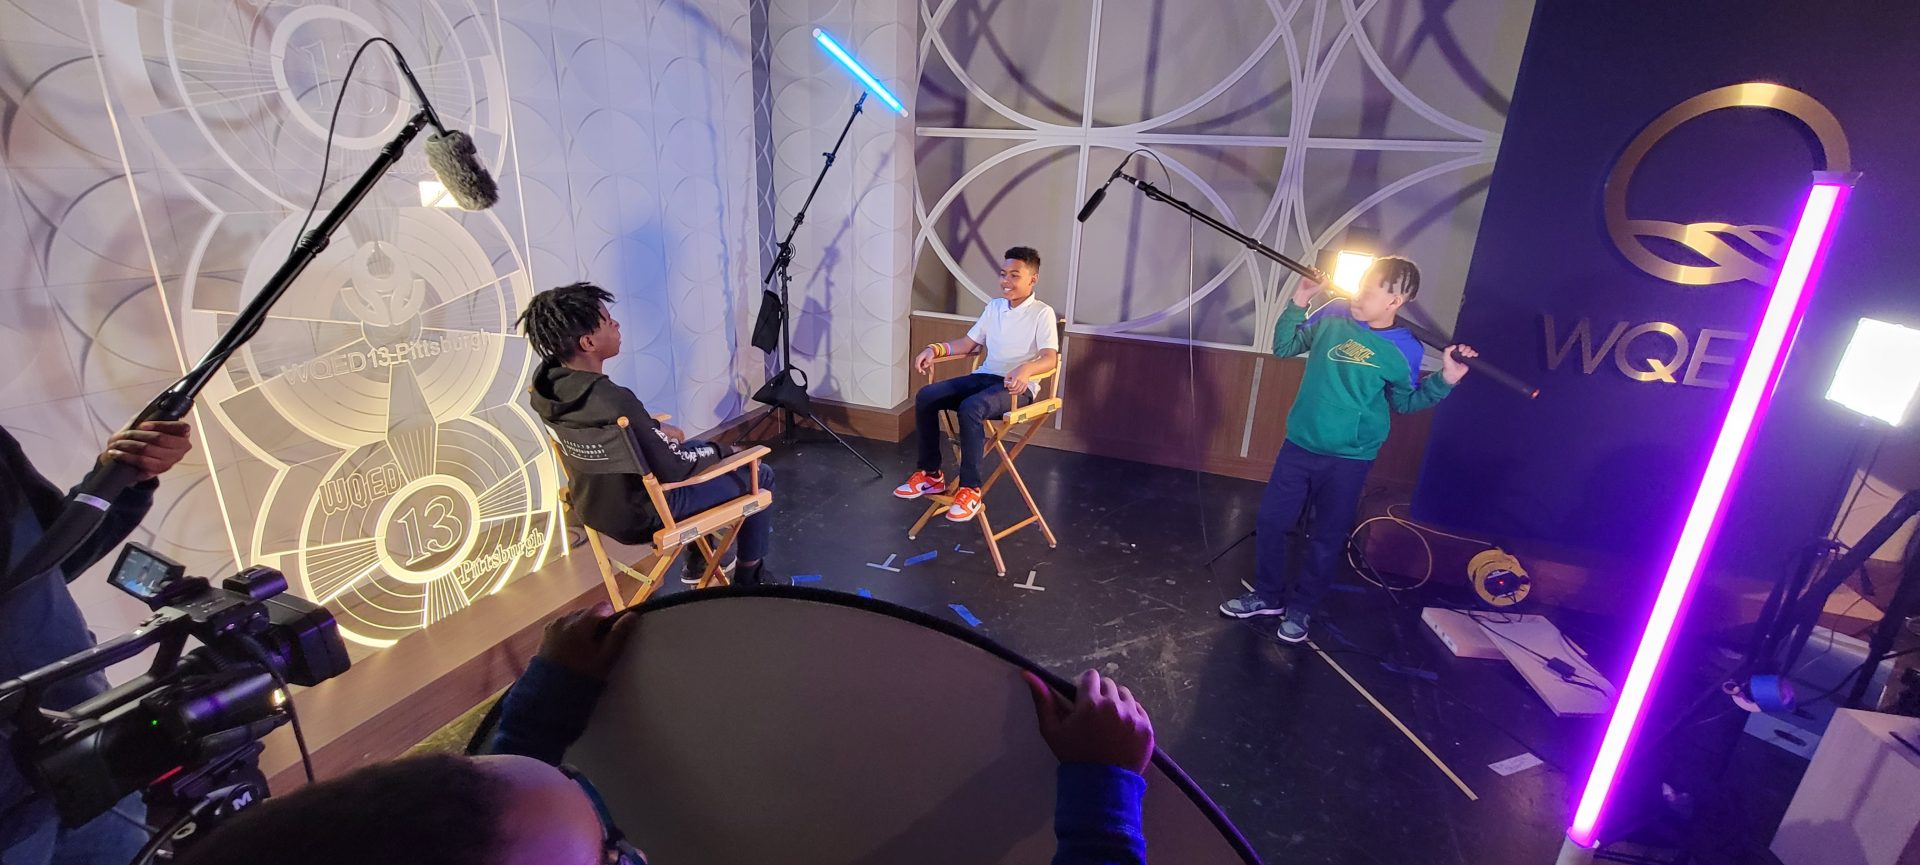 Students in the studio filming